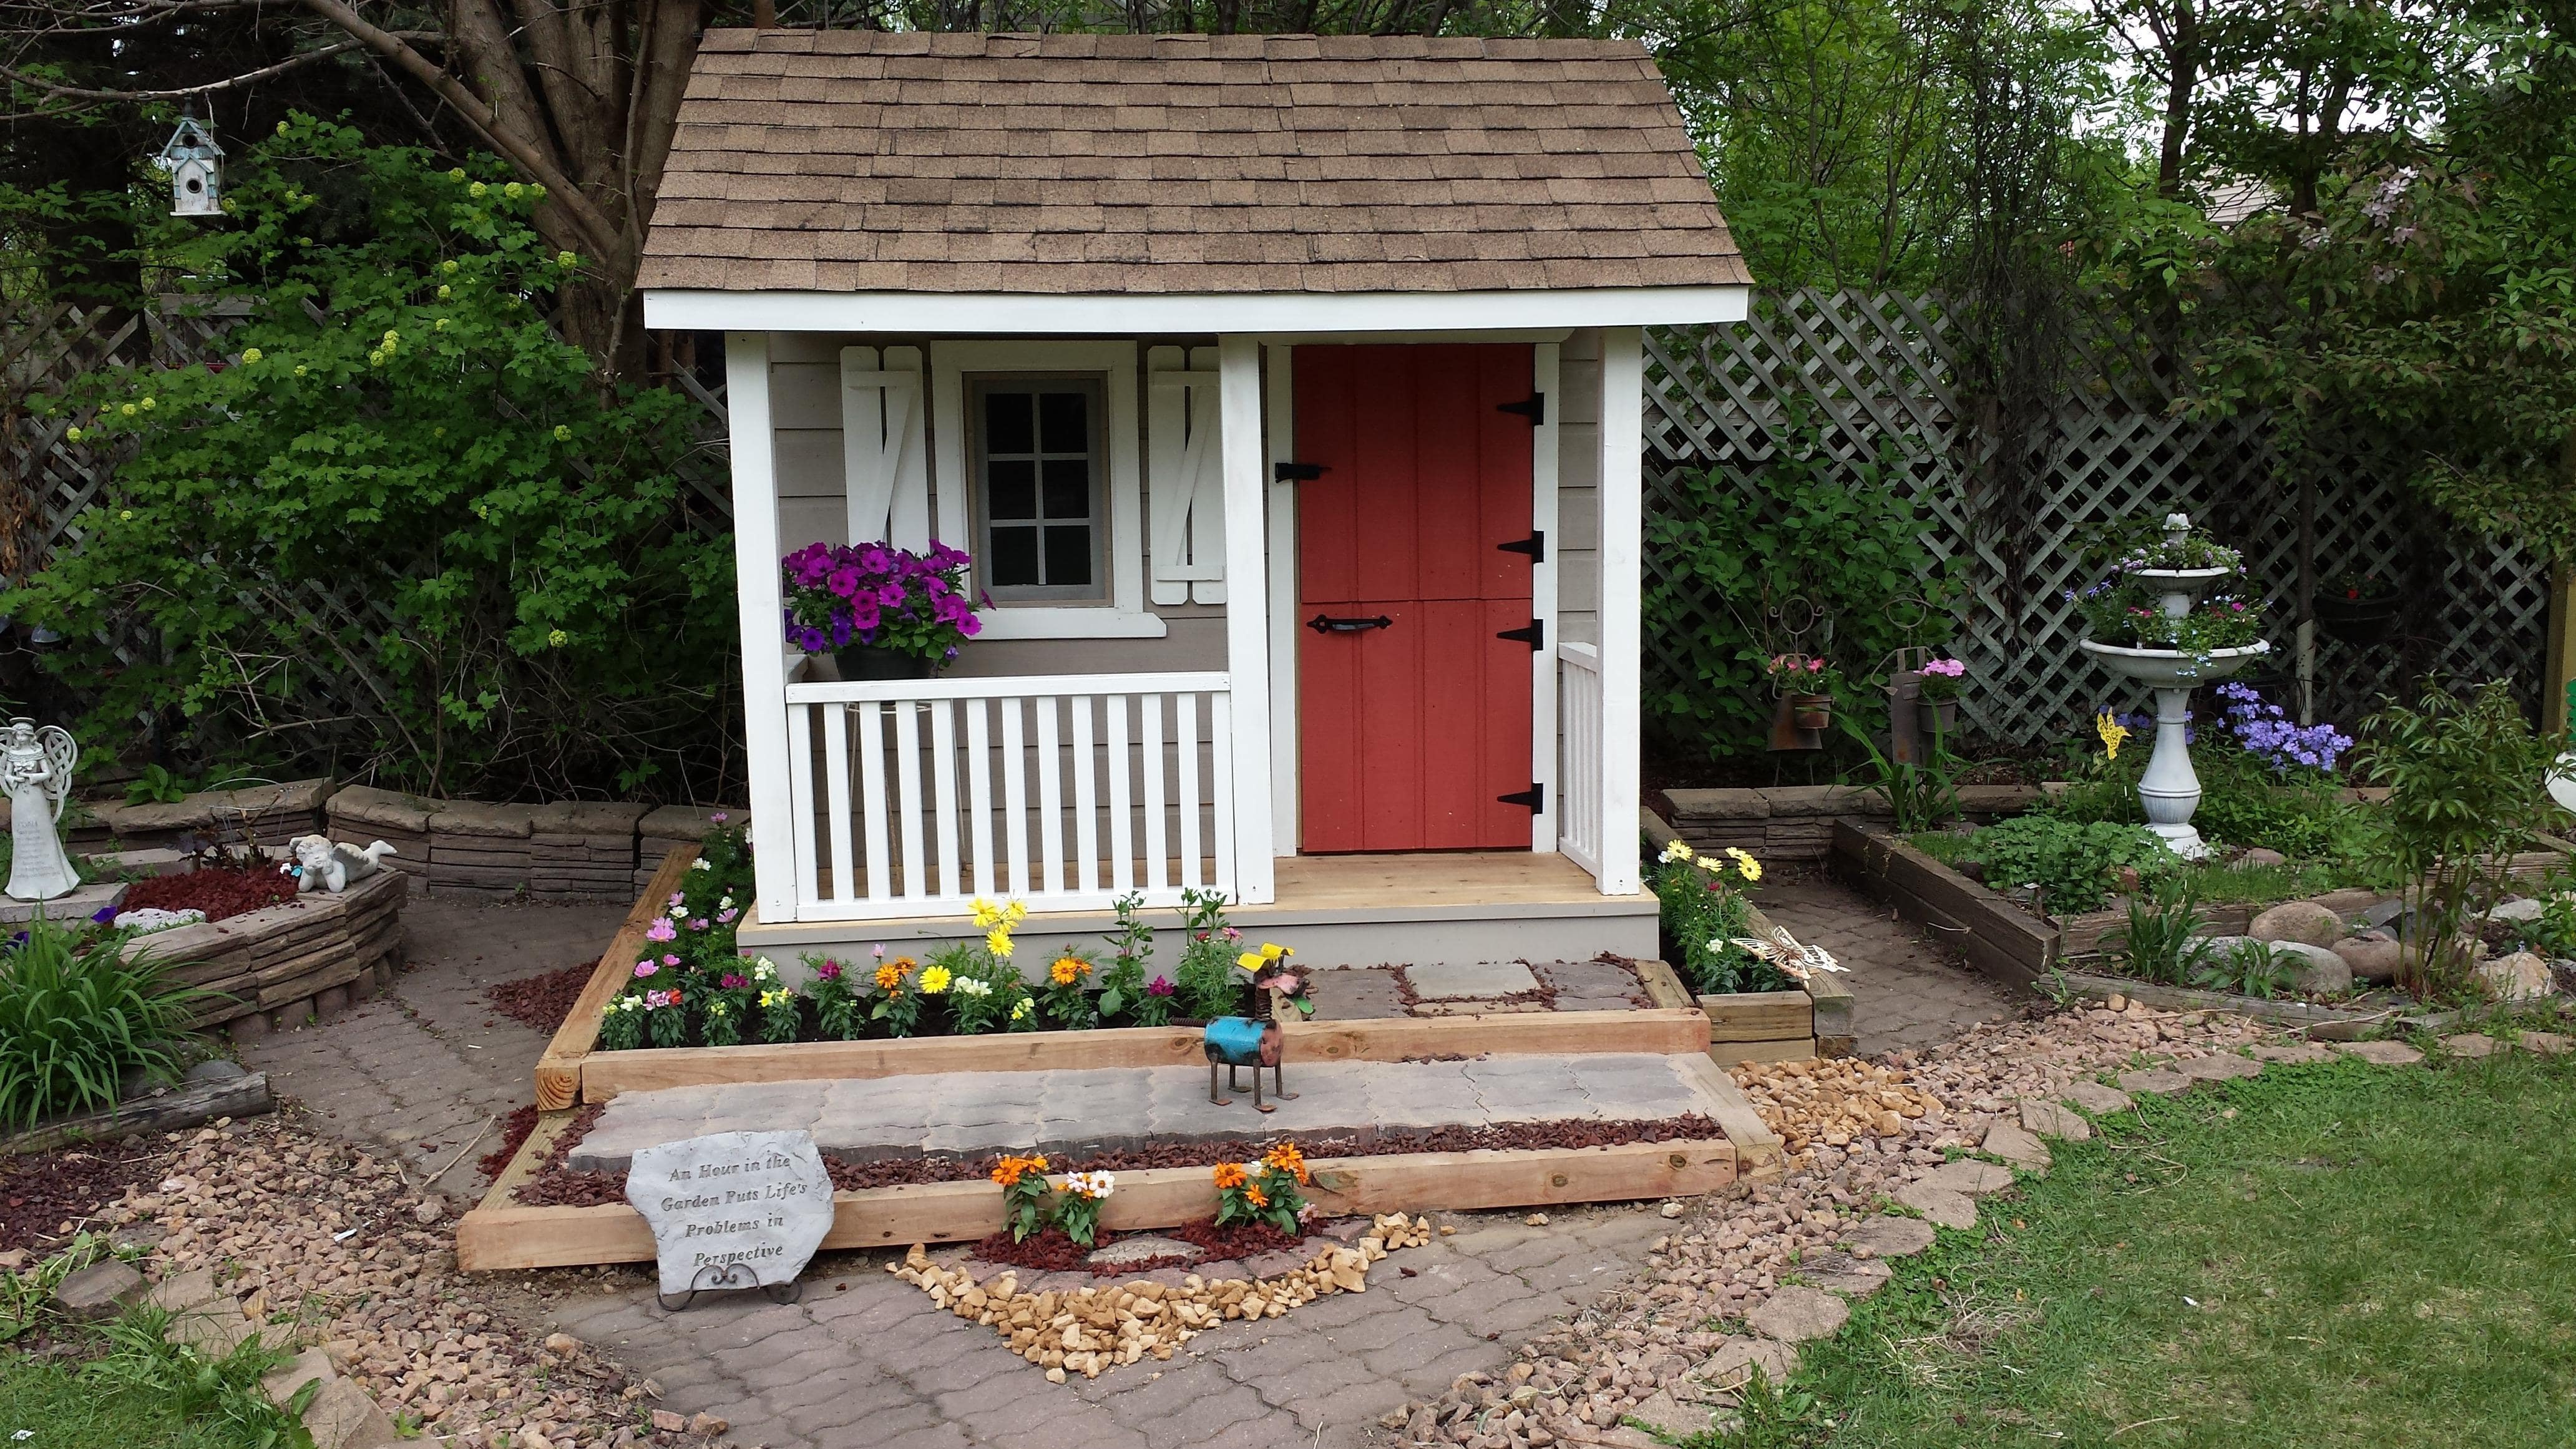 Peach picker porch 7x7 playhouse with dutch door in Bloomington Indiana. ID number 177035-2.